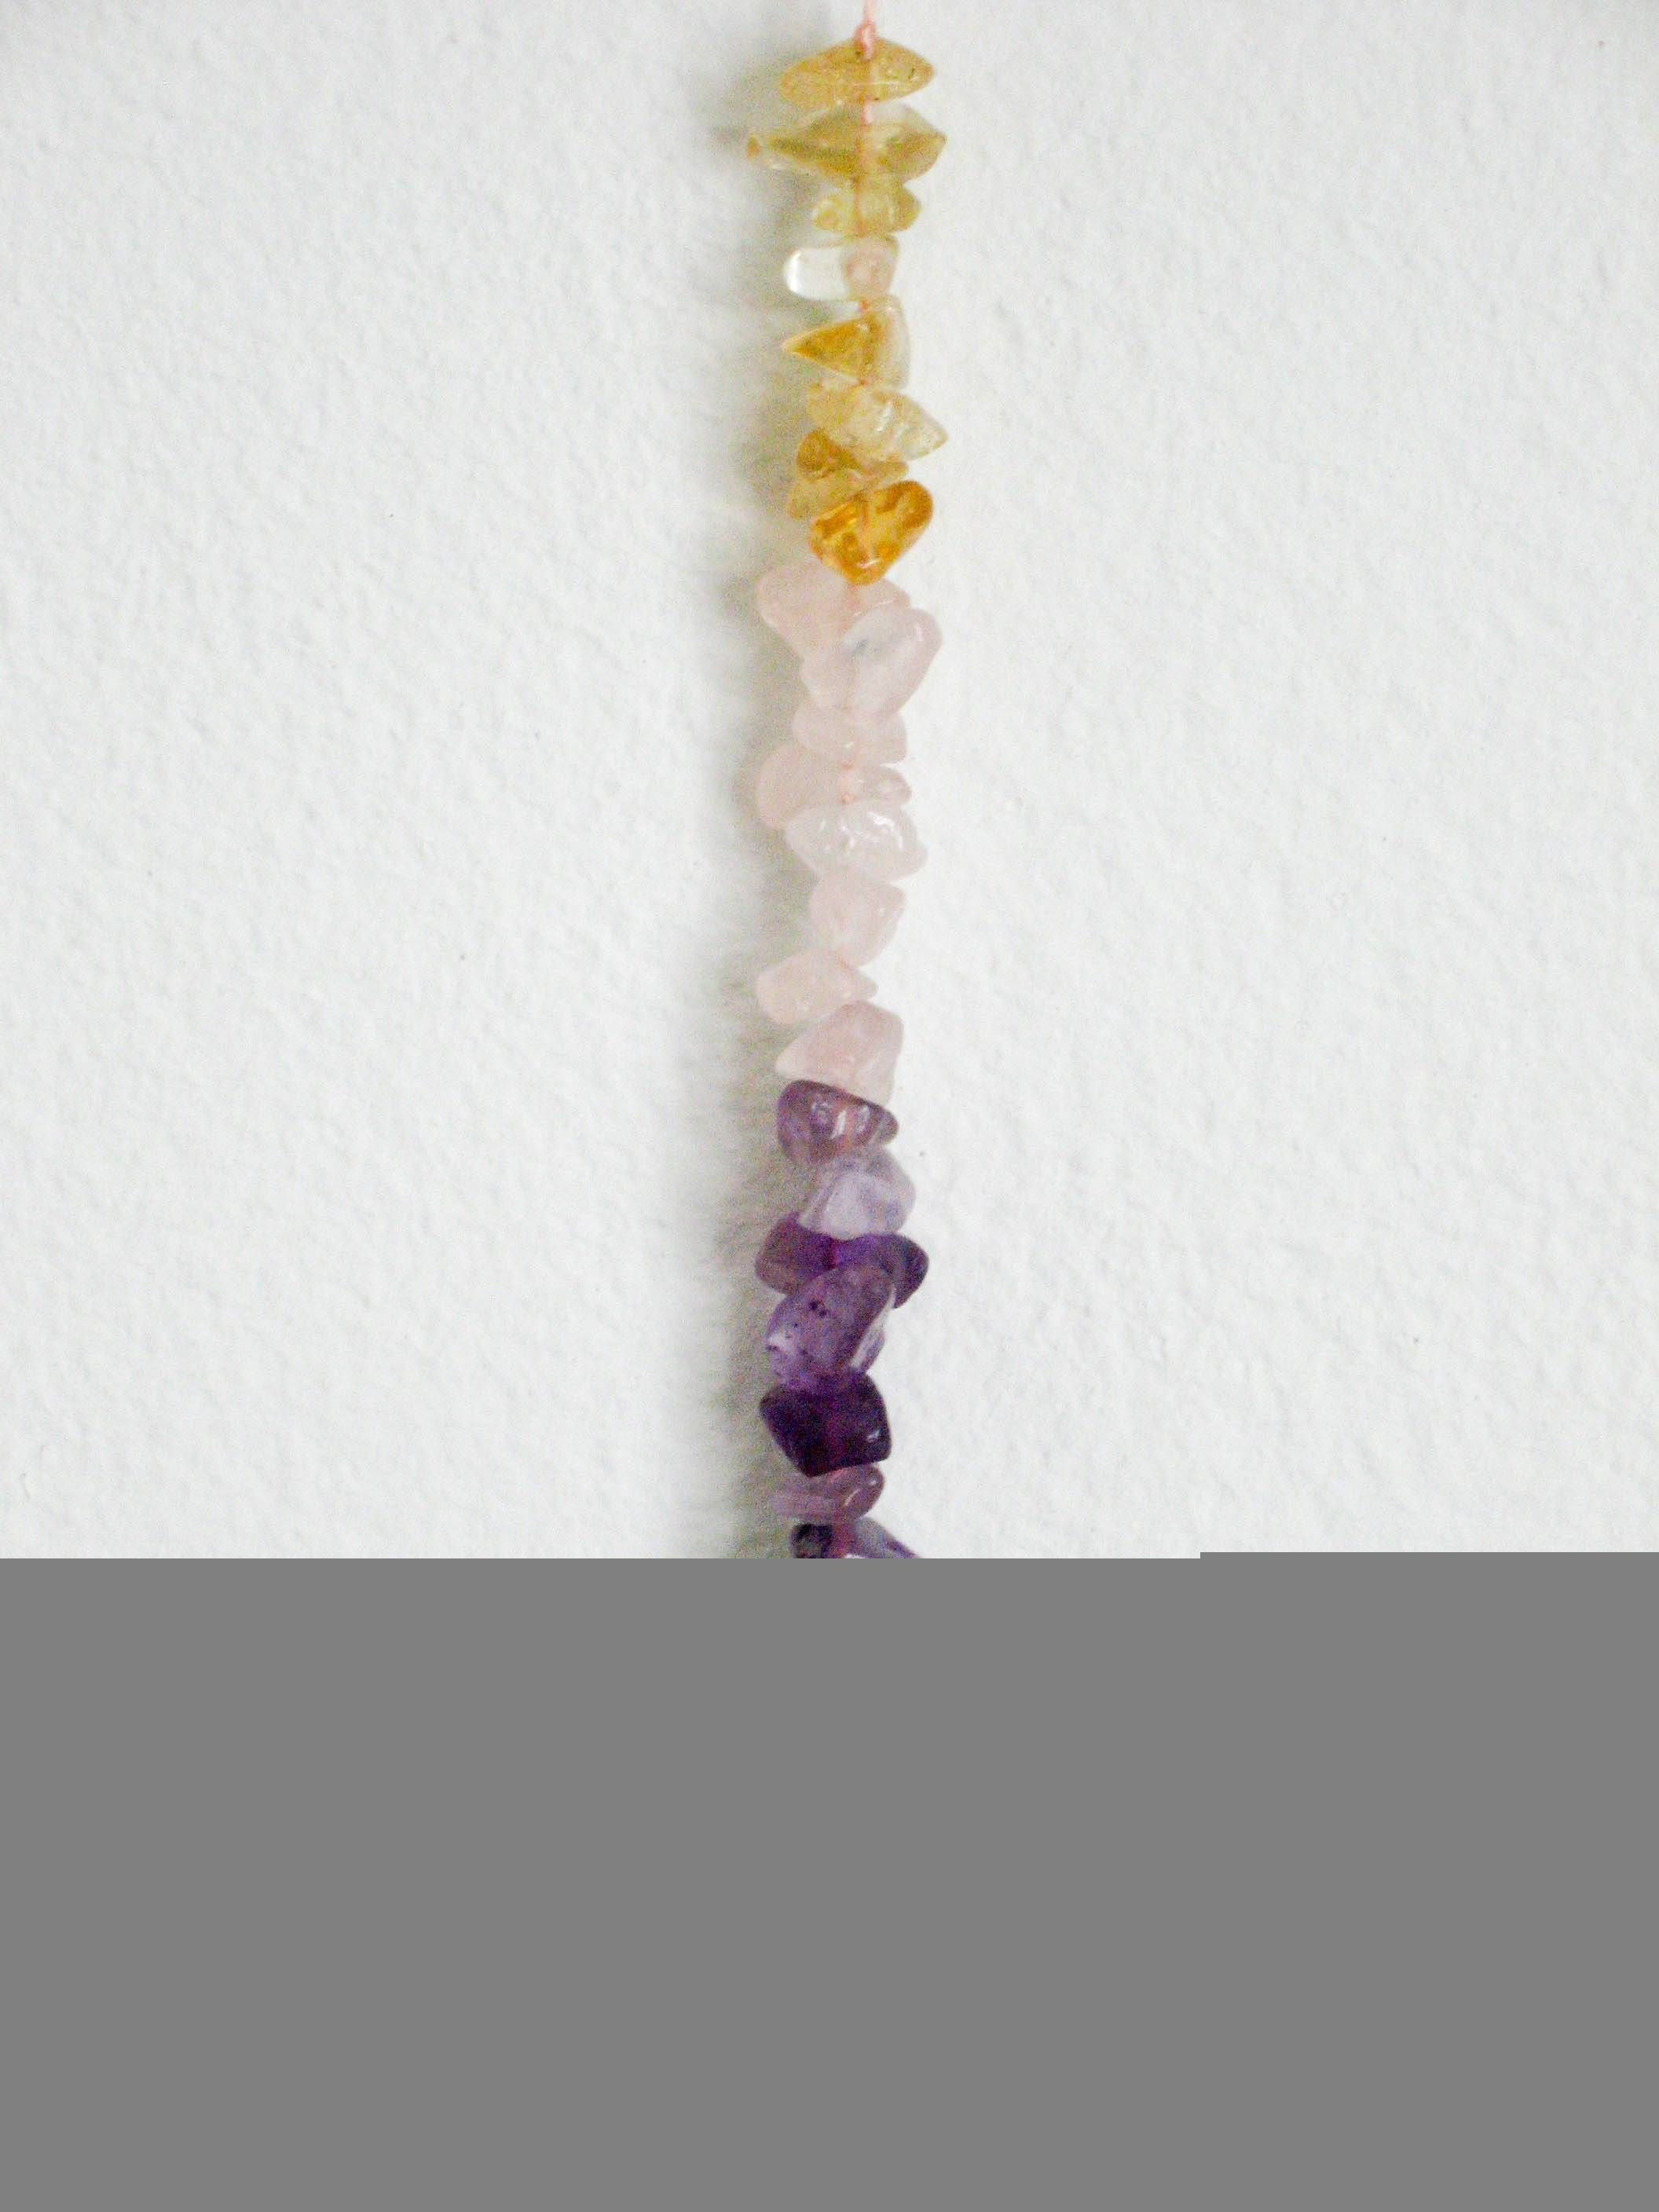 Dreamy Wall Decor, Gemstone Wall Hanging, Dreamy Baby, Rainbow Pertaining To Most Up To Date Gemstone Wall Art (View 31 of 31)